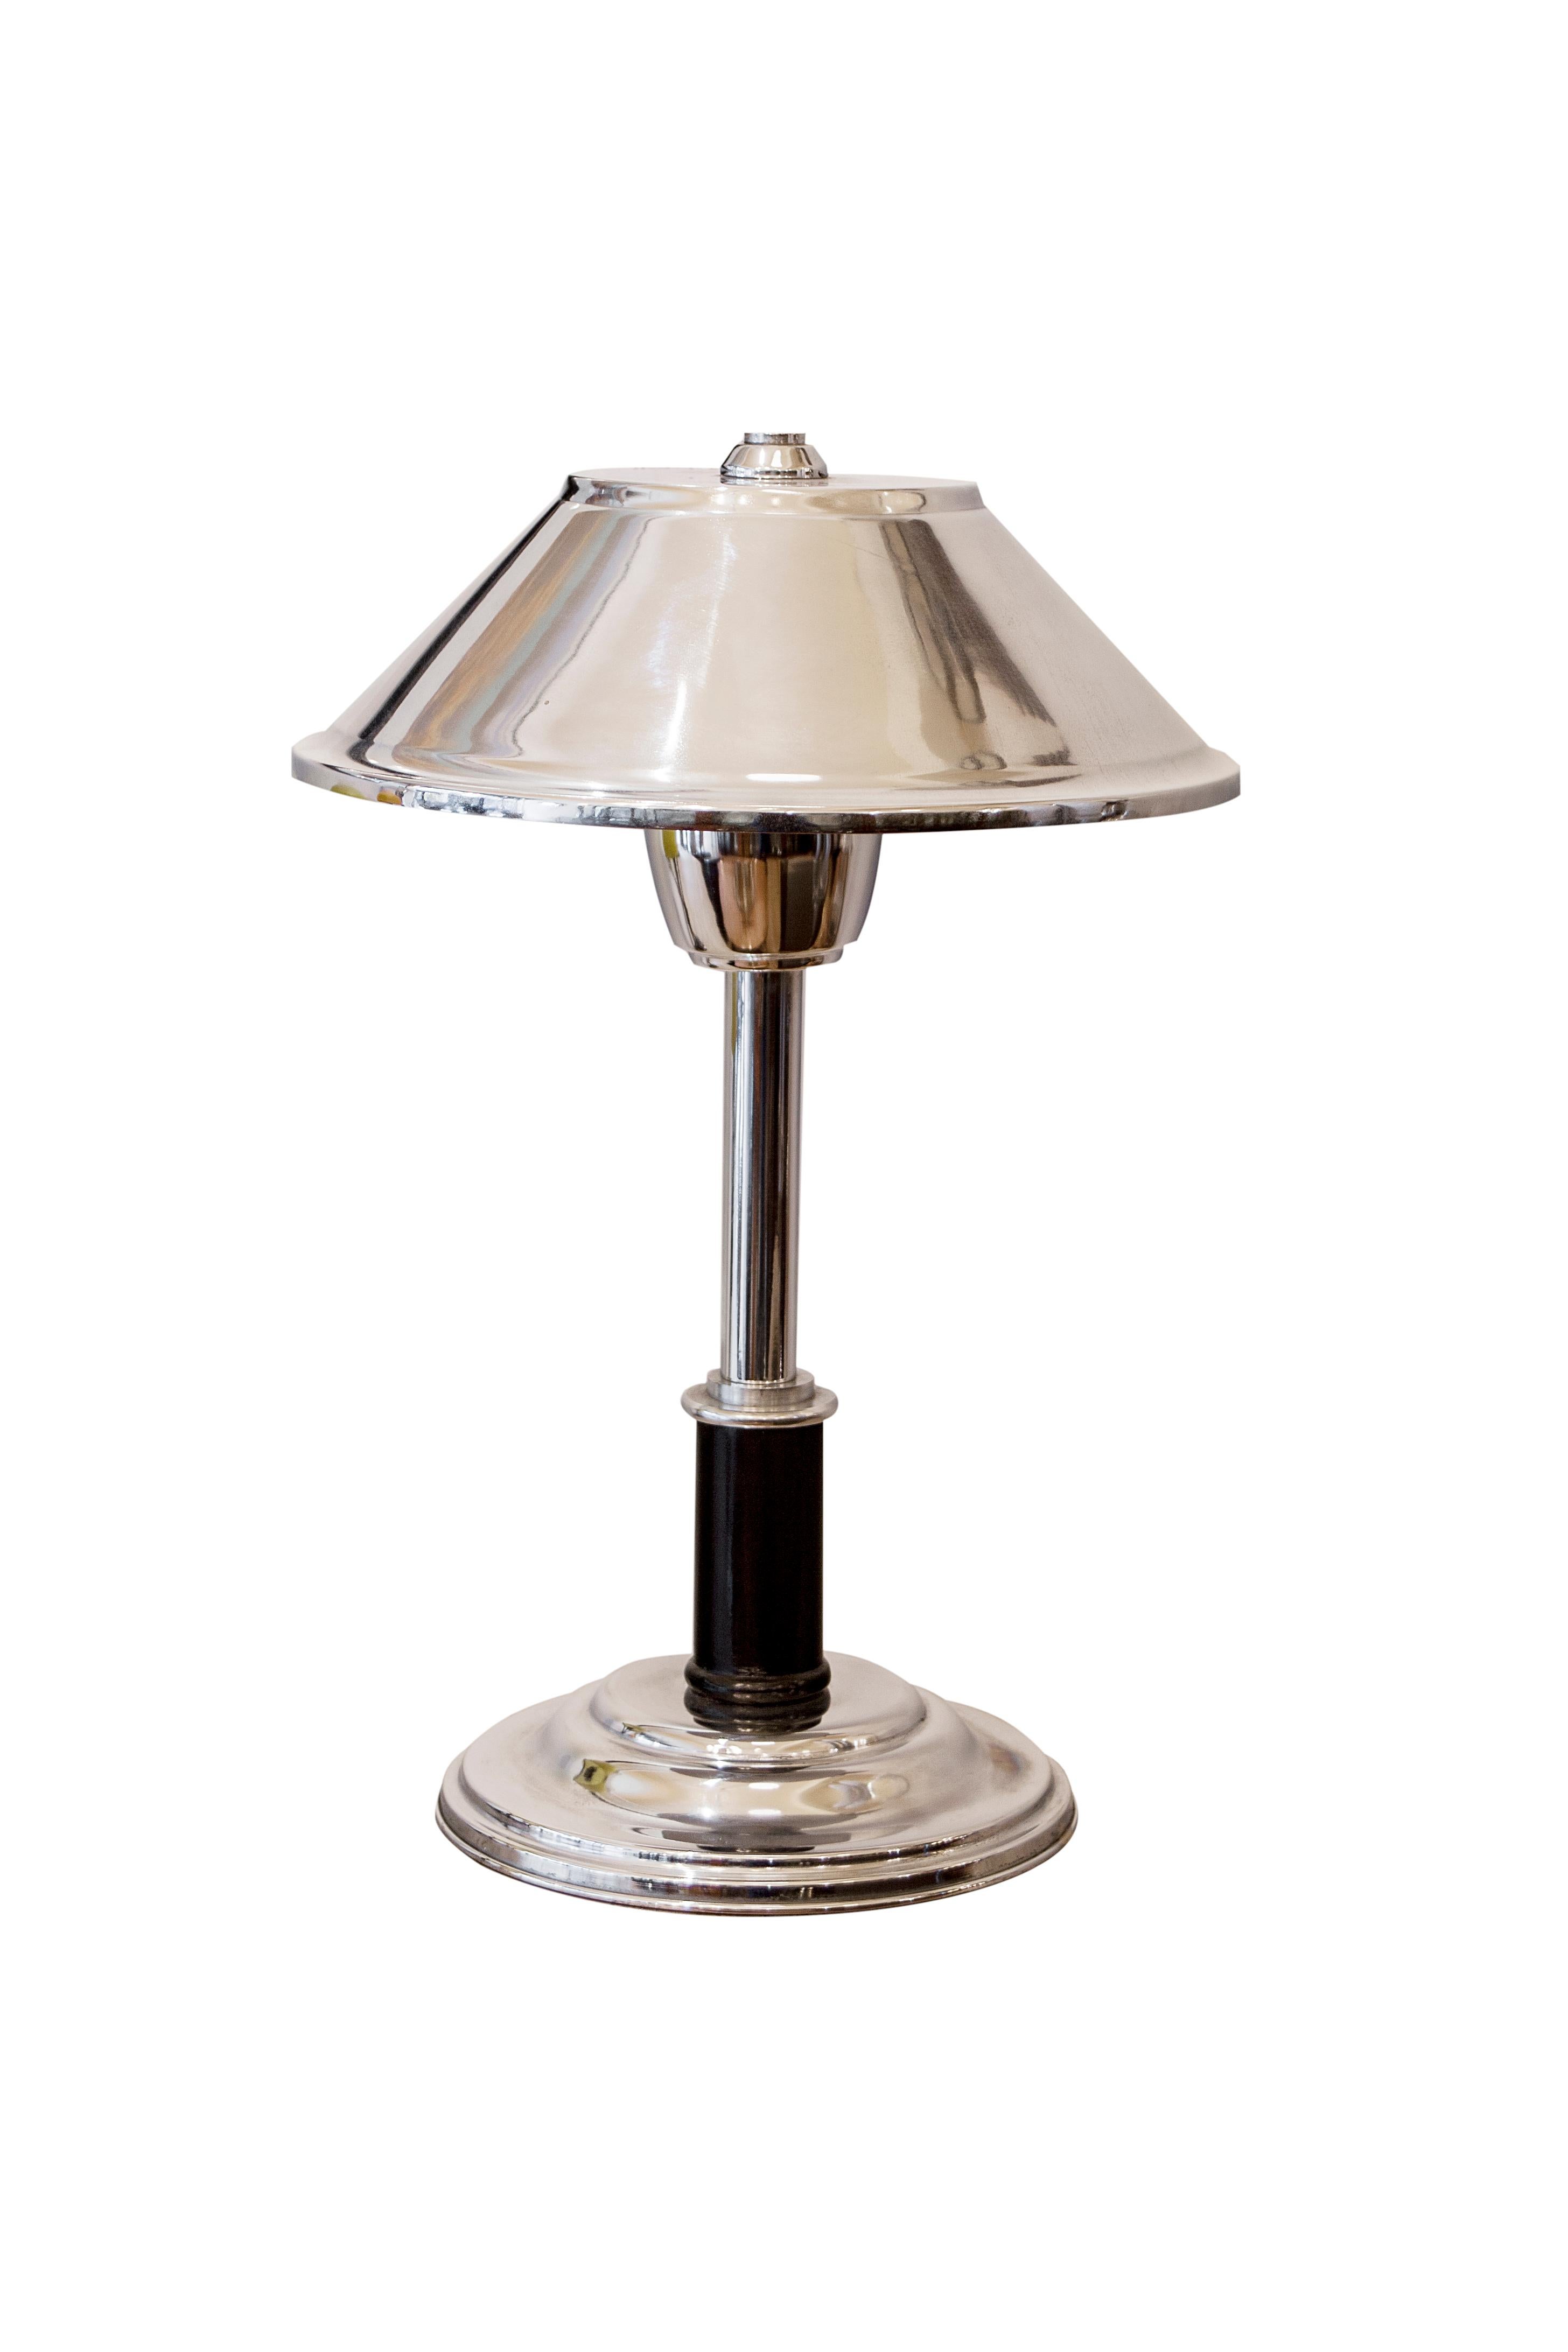 Pair of Art Deco Table Lamp in wood and chrome, 1930 For Sale 11